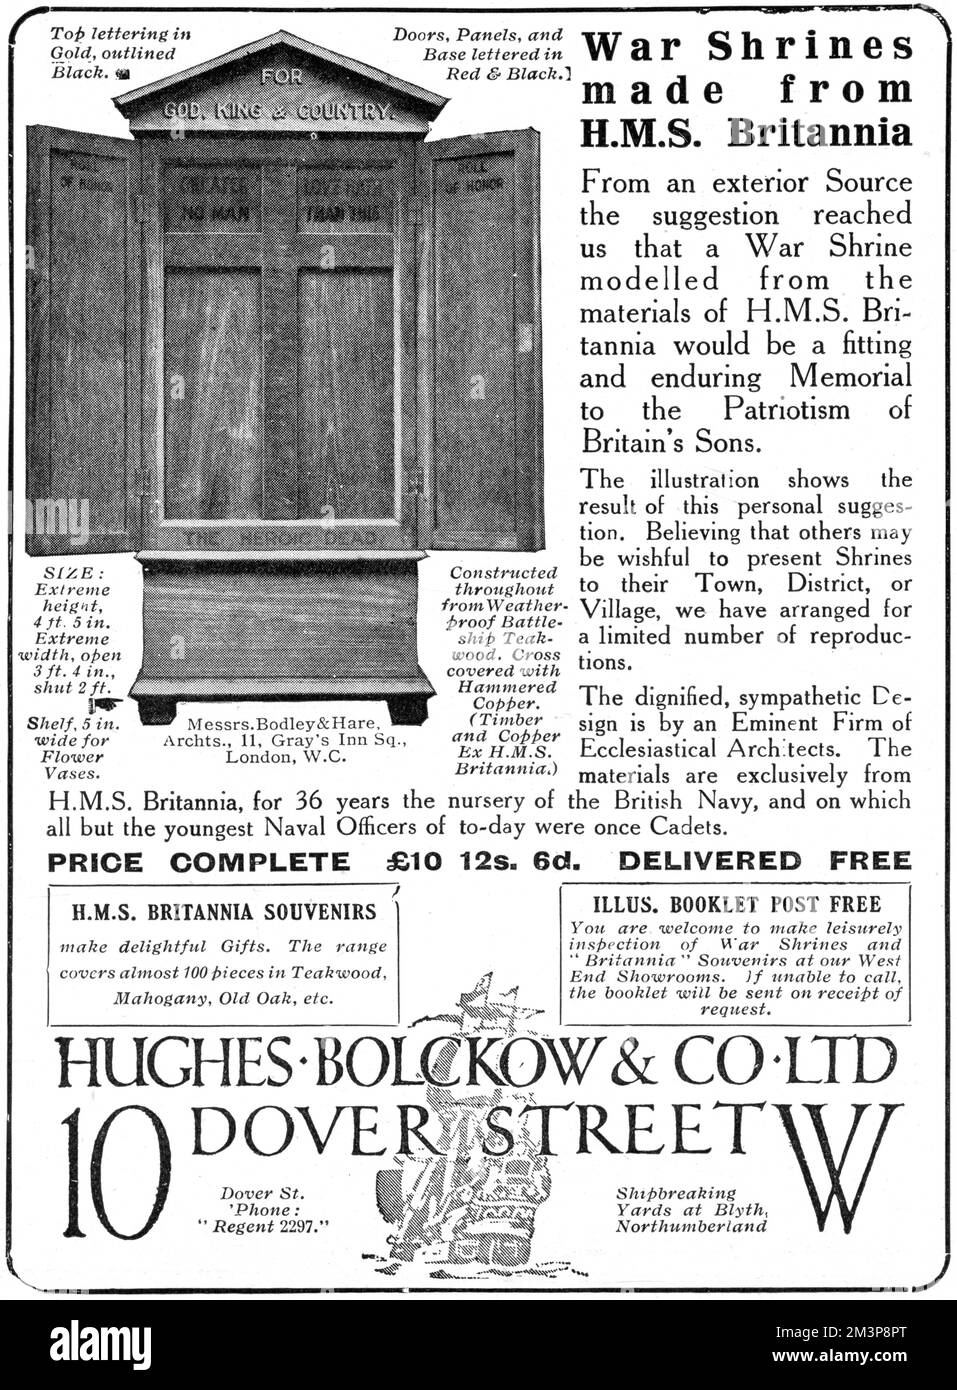 Advertisement for Hughes, Bolckow &amp; Co of Dover Street, London, promoting war shrines made from he materials of H.M.S. Britannia as a fitting memorial 'to the Patriotism of Britain's Sons.'     Date: 1918 Stock Photo